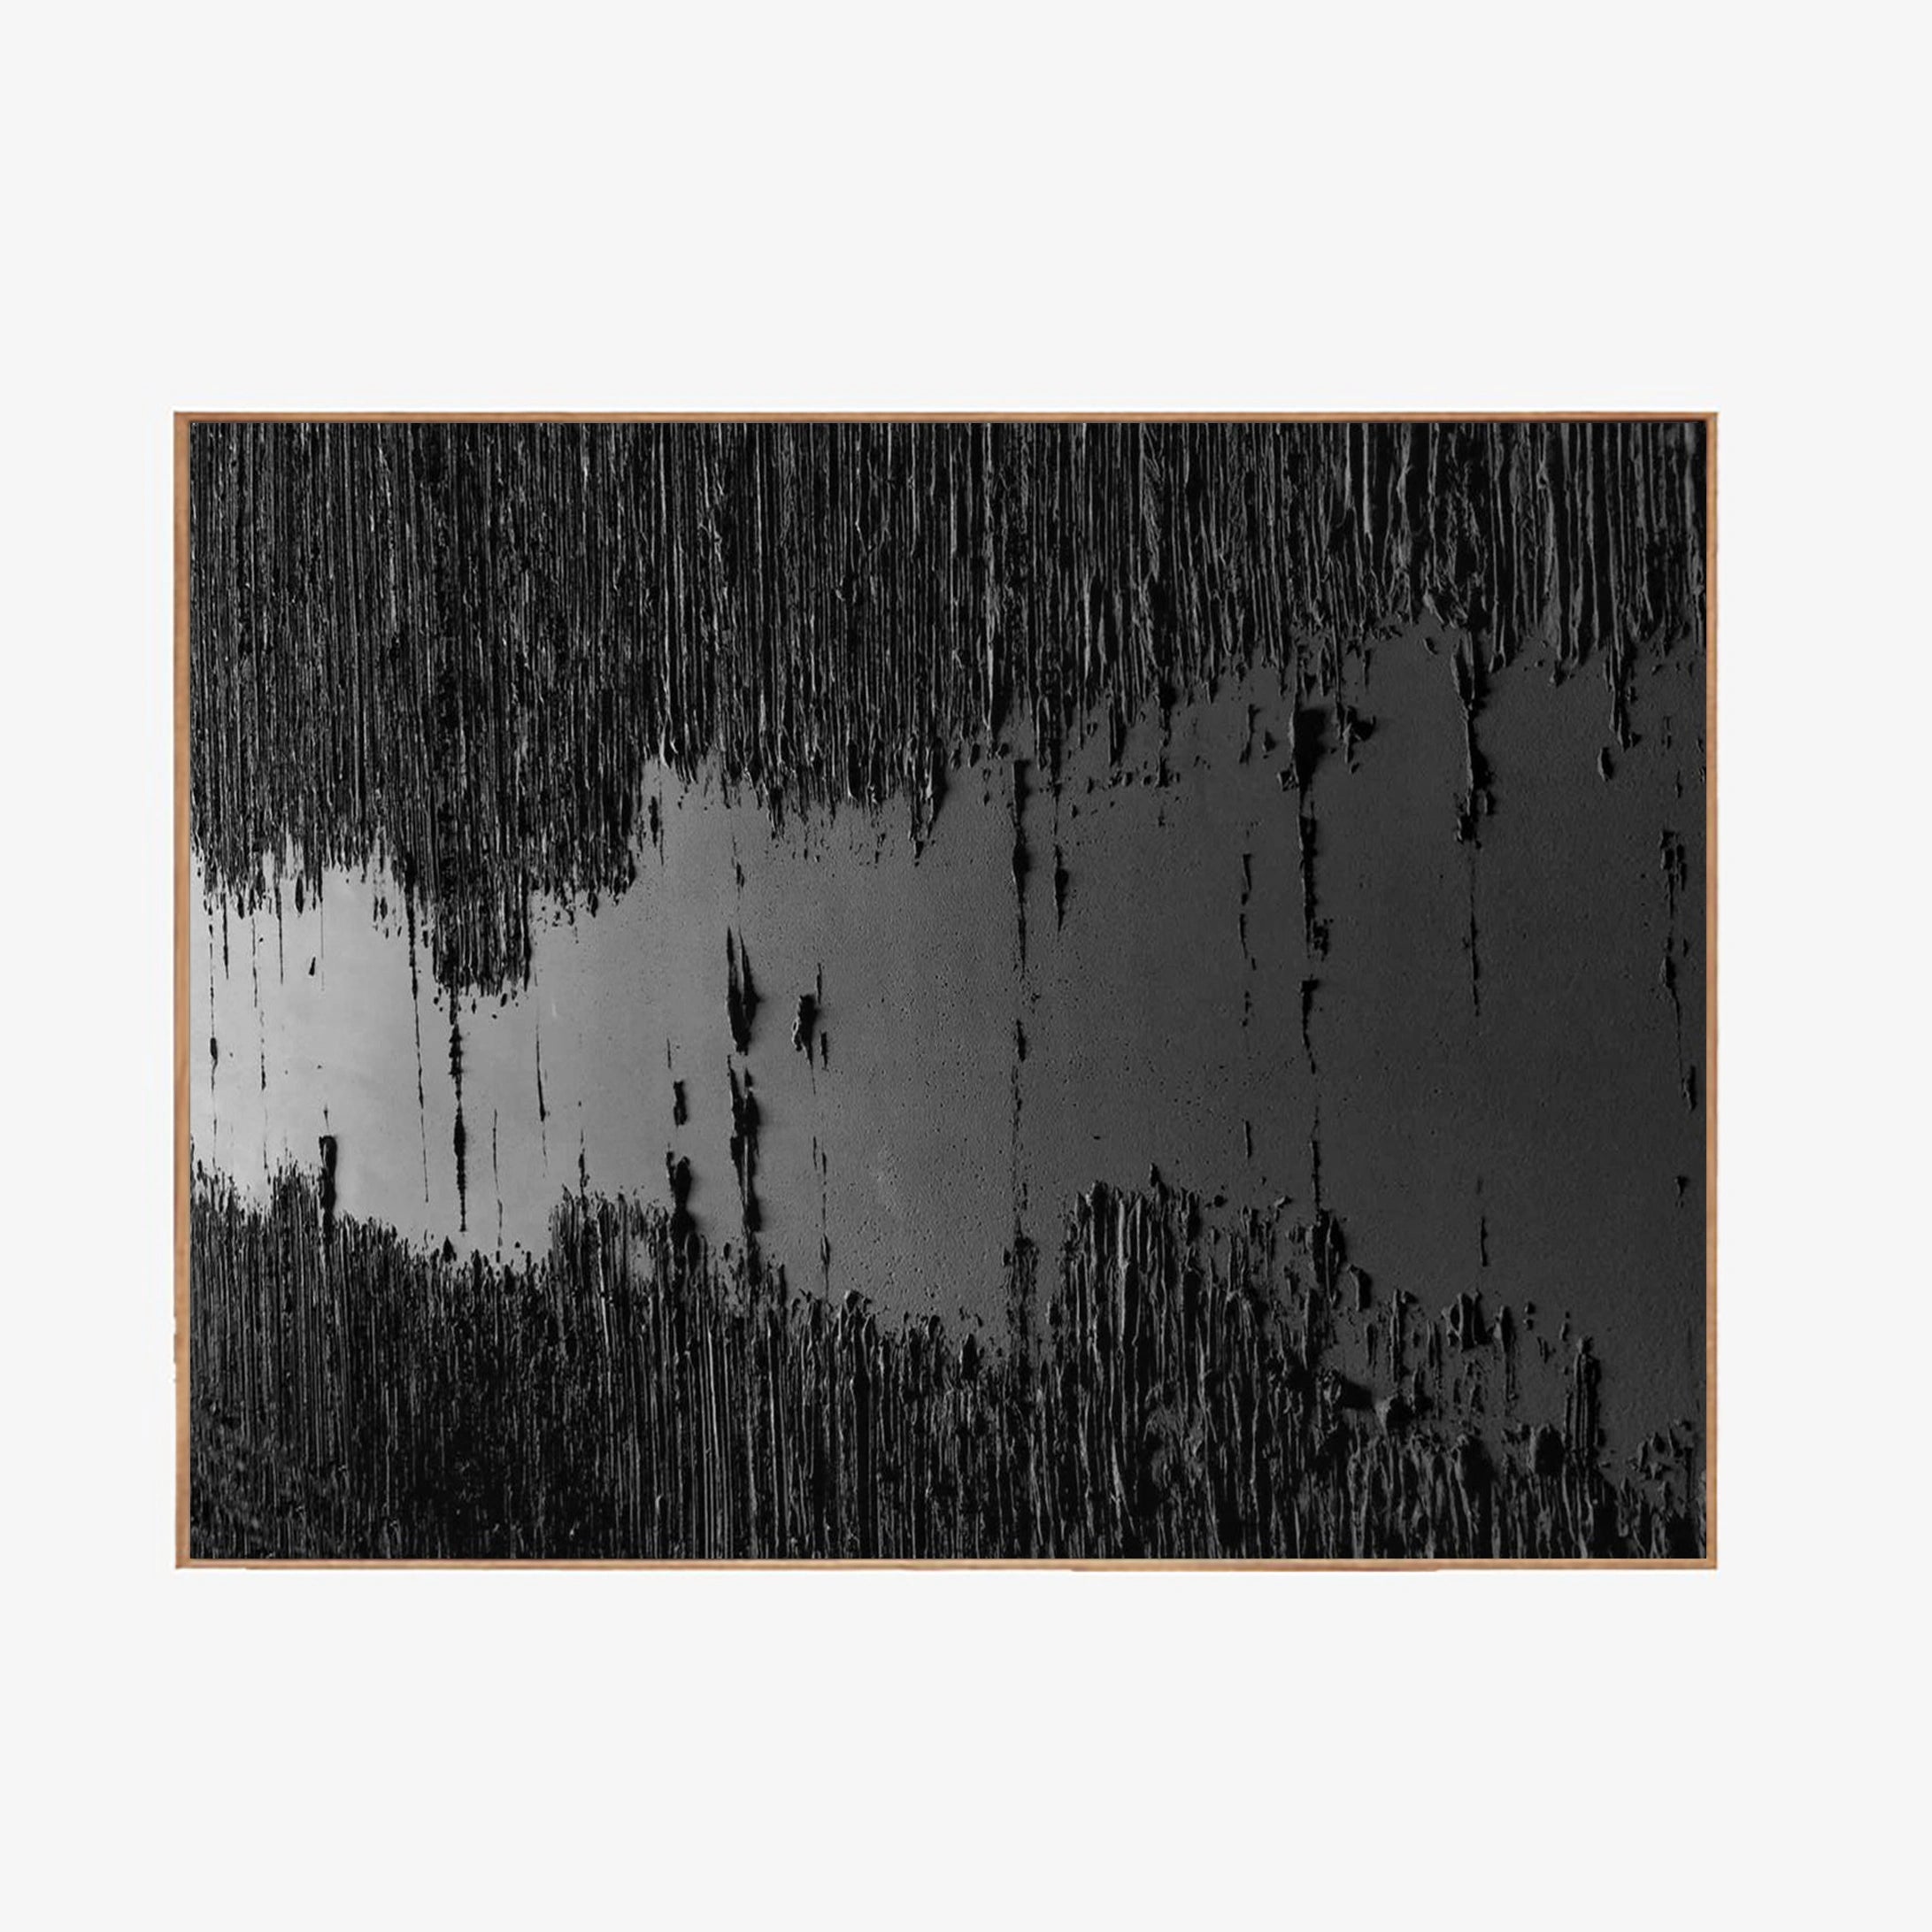 Black 3D Textured River Minimalist Painting on Canvas for Wall Decro